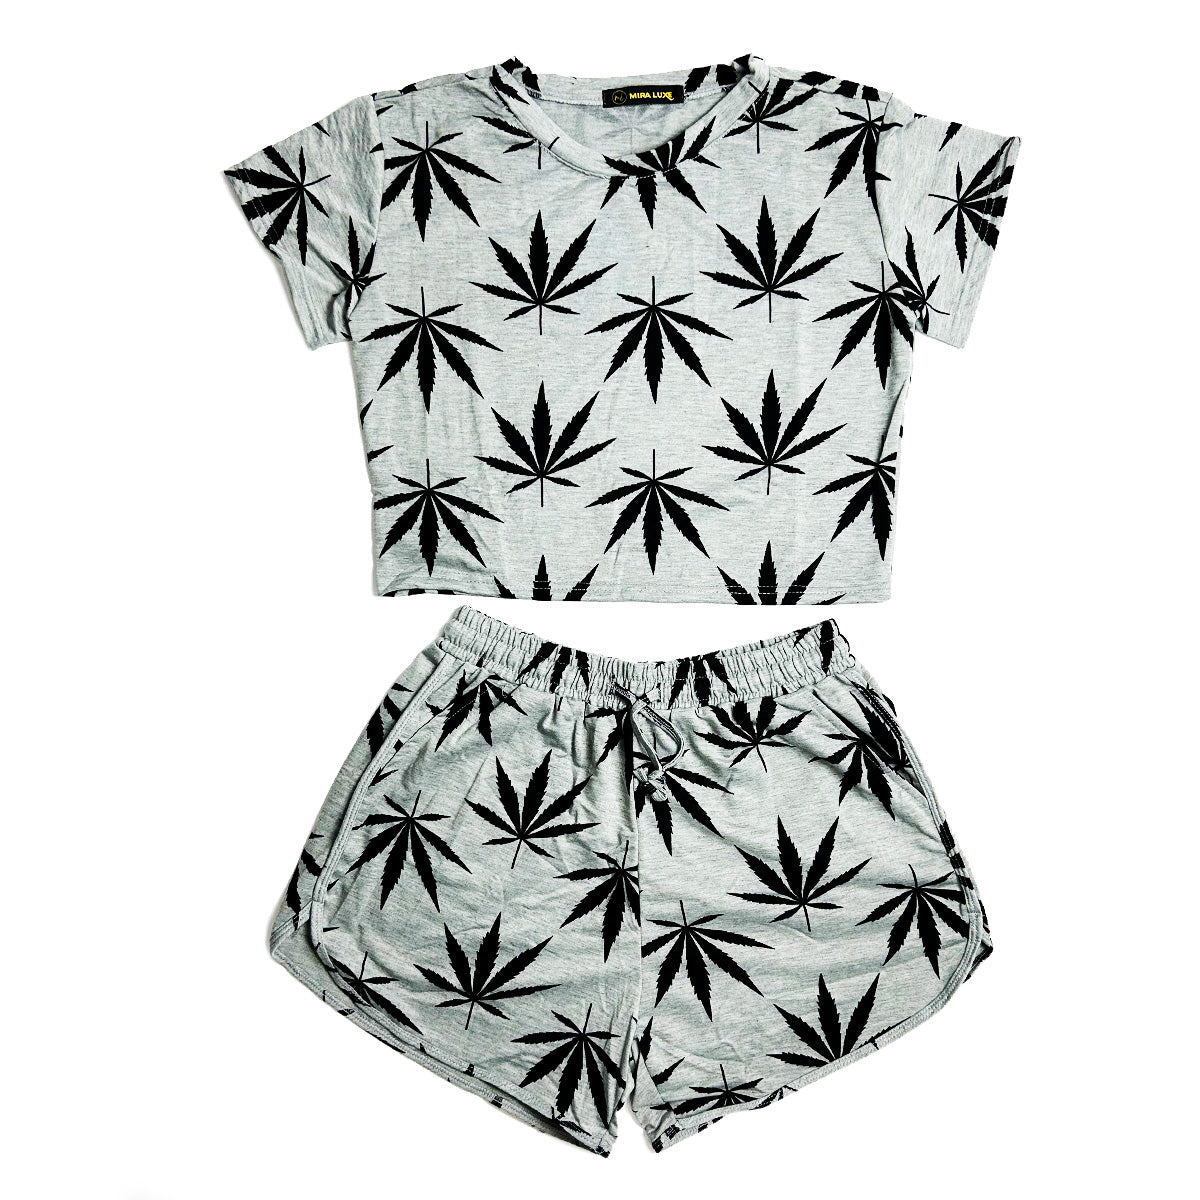 Woman Weed Black Leaf Crop Top with SHORTS - Pack of 6 Units 2M, 2L, 2XL